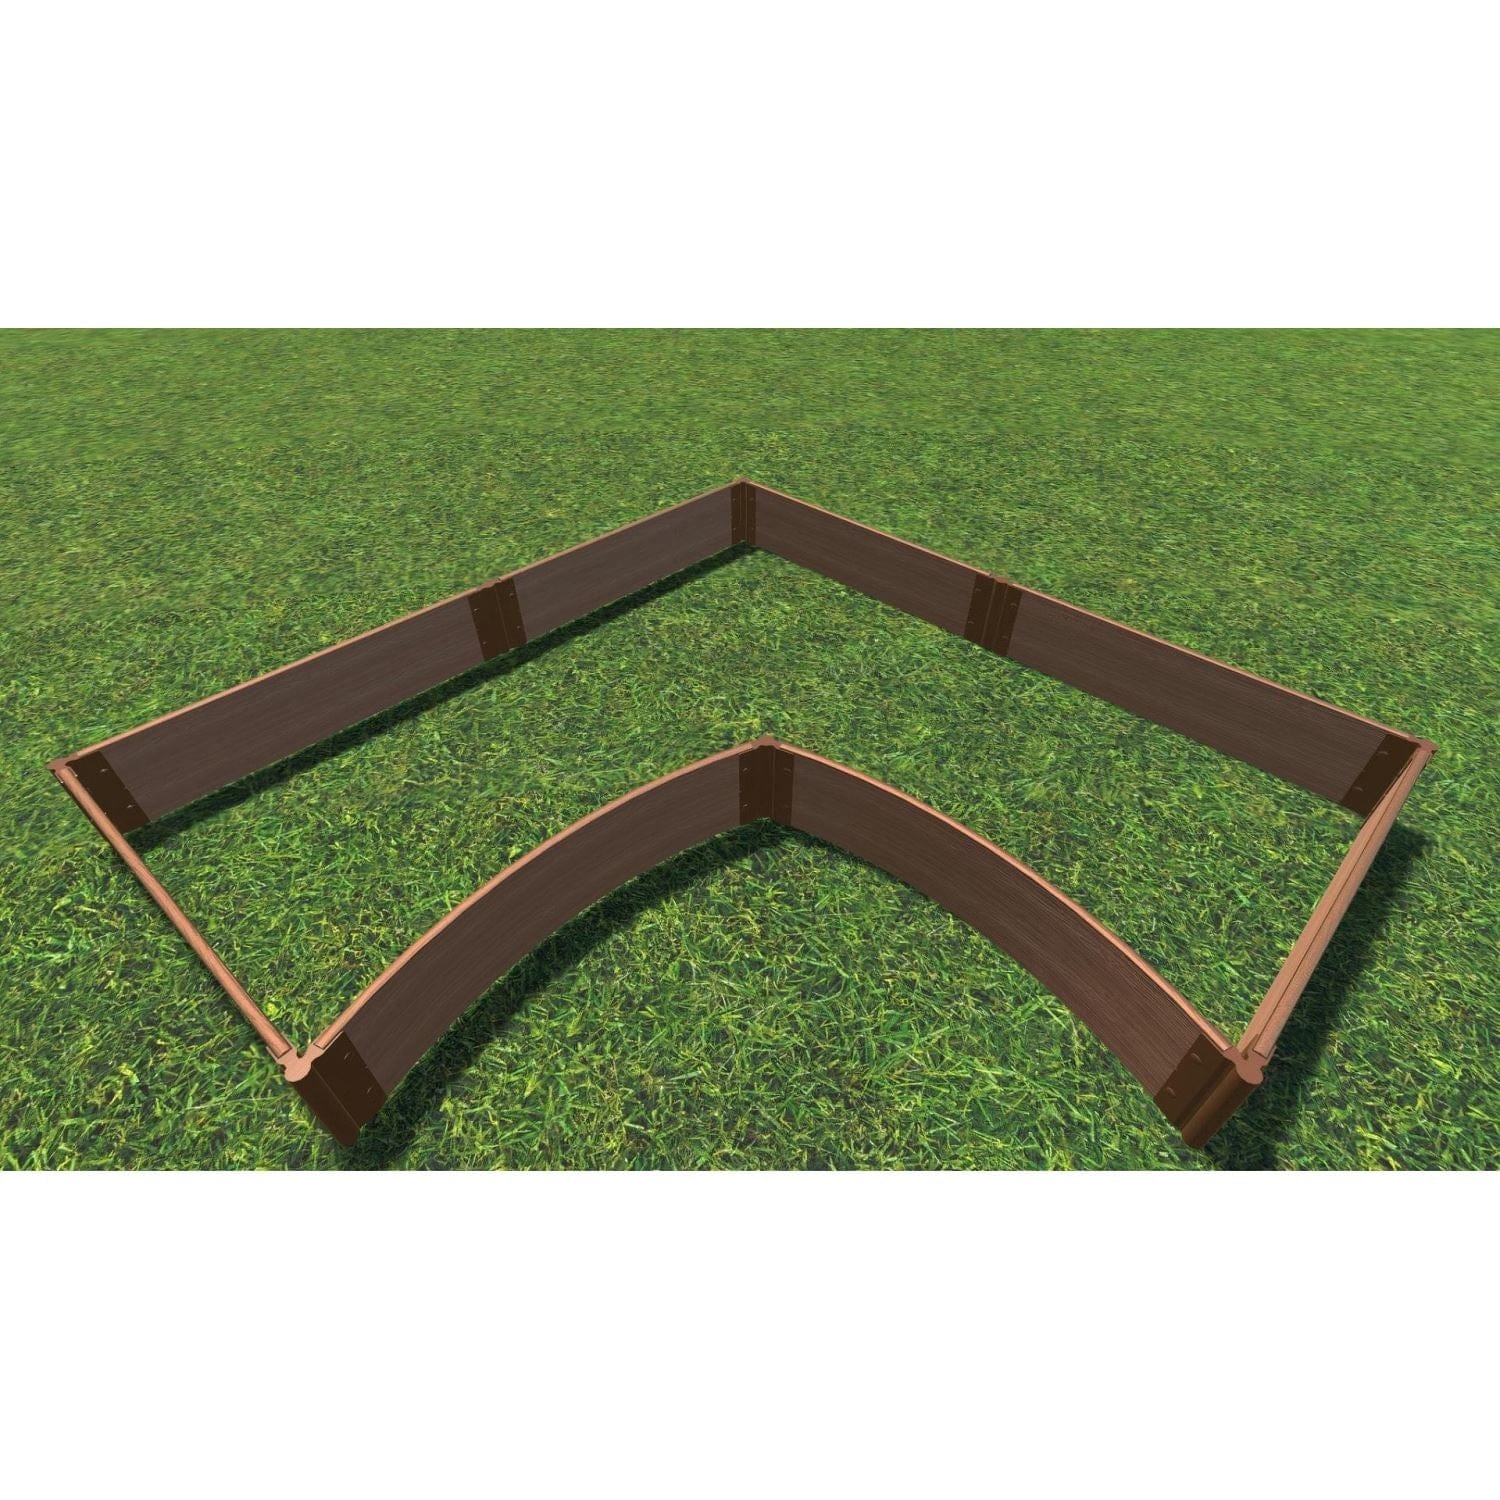 Frame It All Gardening Accessories 1" Frame It All | Tool-Free Grand Concourse Interior Curved Corner Raised Garden Bed 8' X 8' X 11" - Classic Sienna 800002026